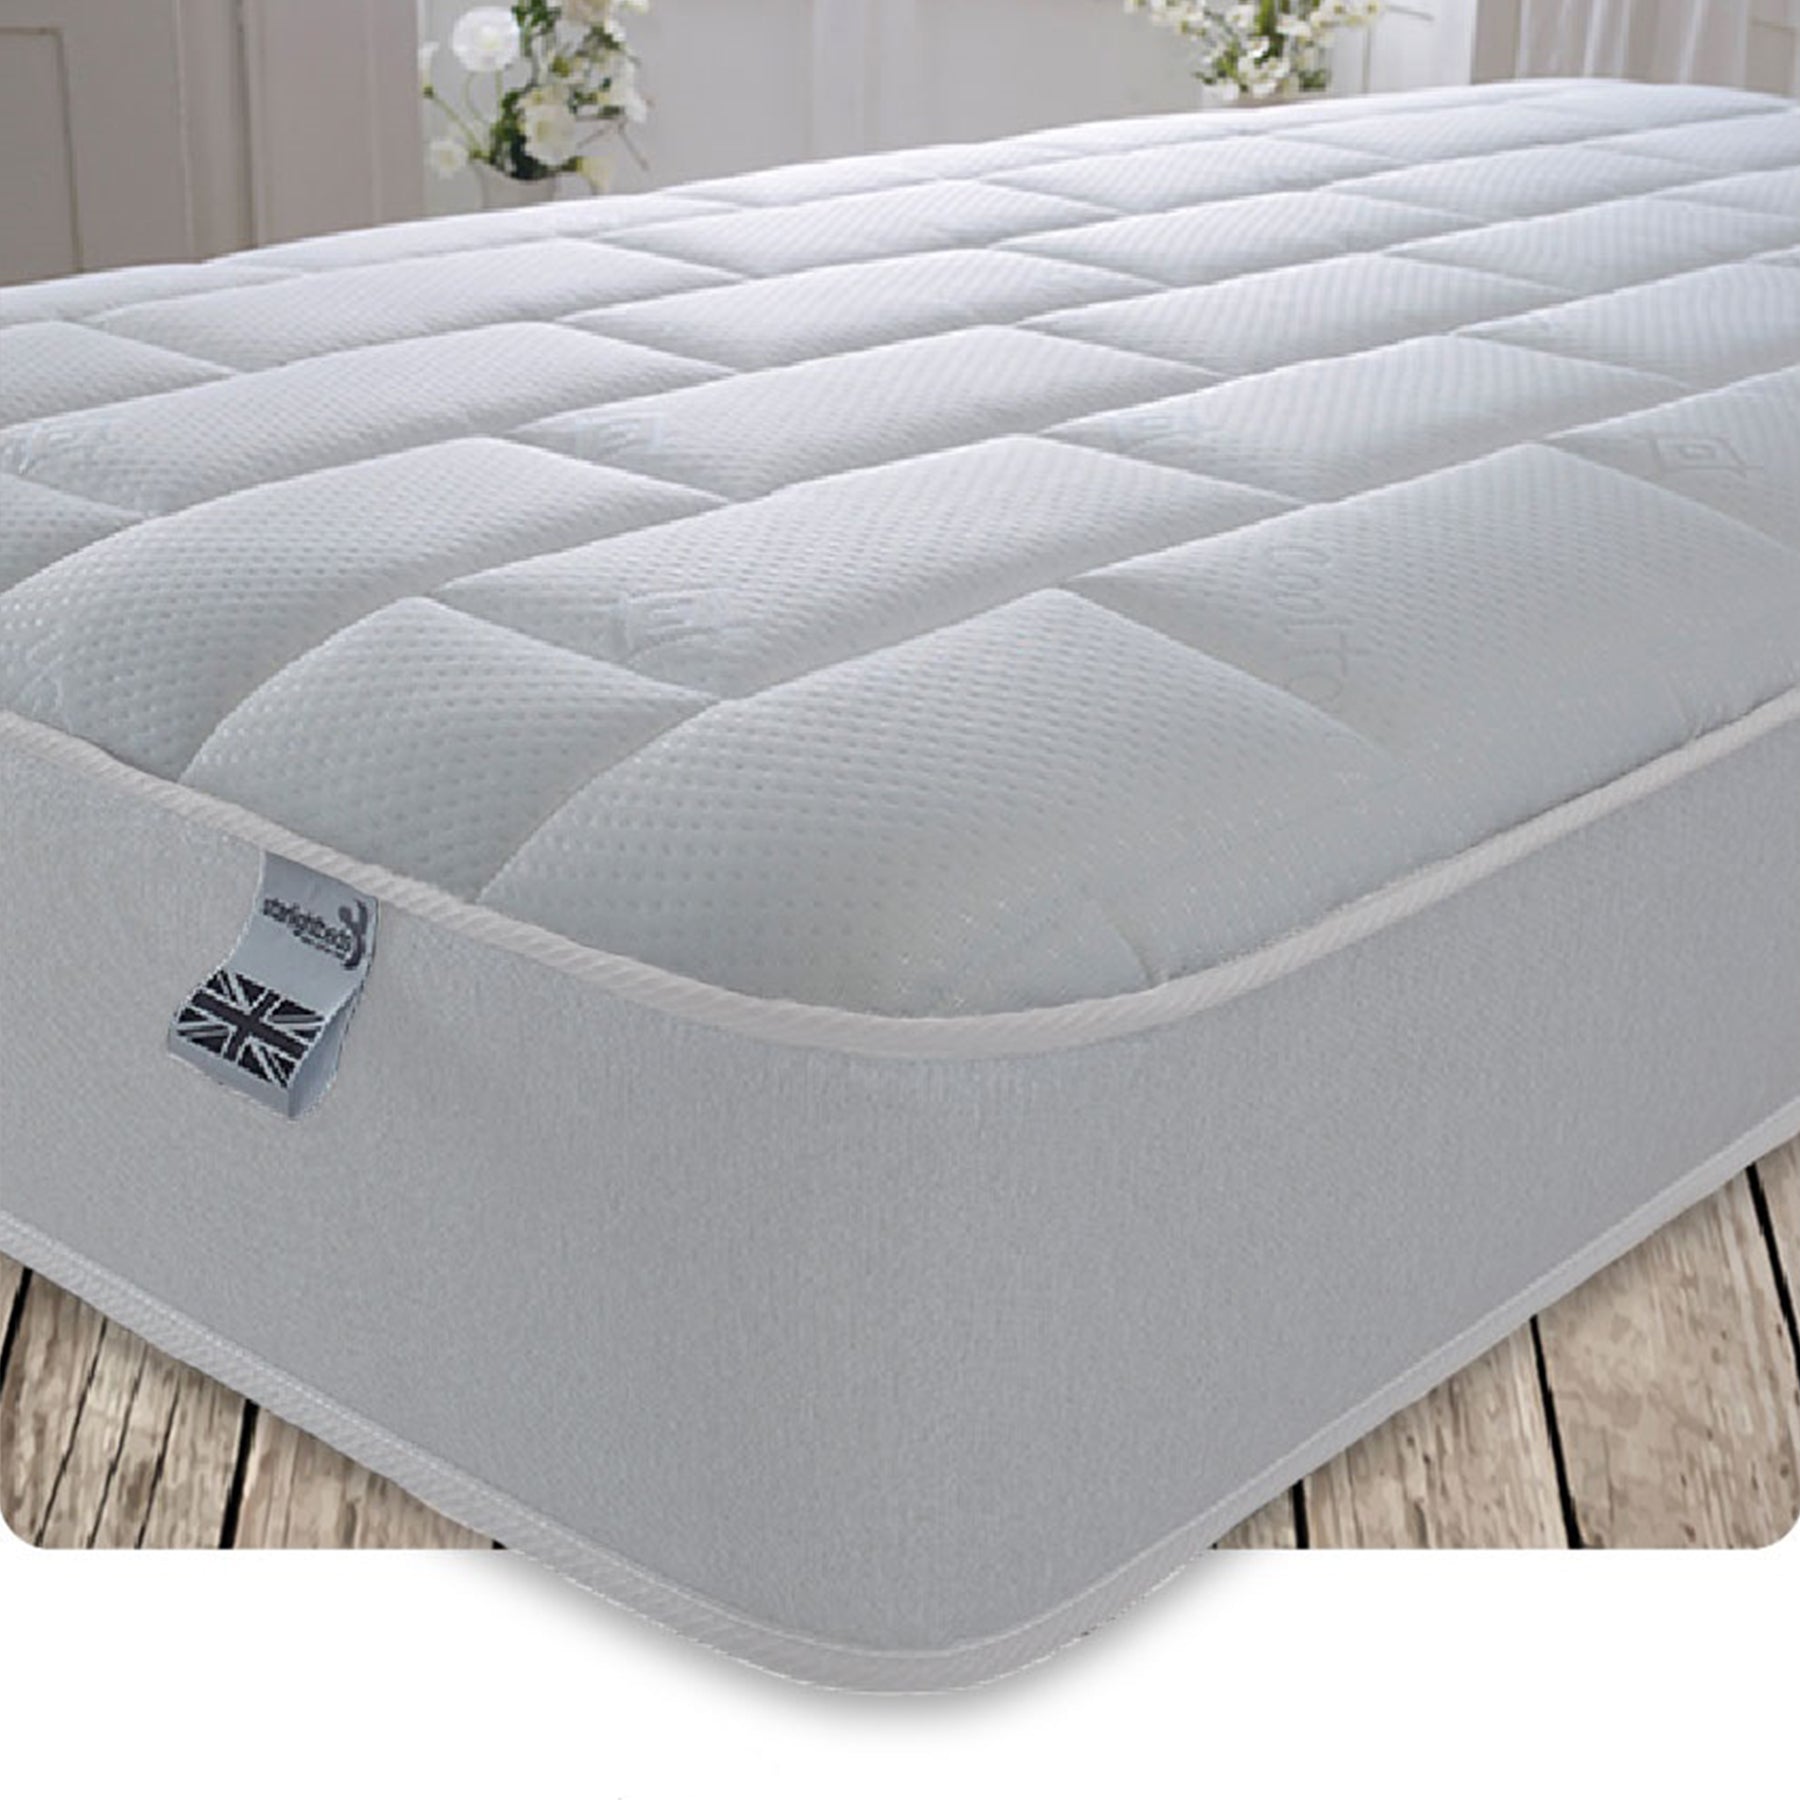 Starlight Beds 7.5" Deep Luxurious Cool Touch Big Bricks Quilting White Border with Memory Foam and Spring Mattress